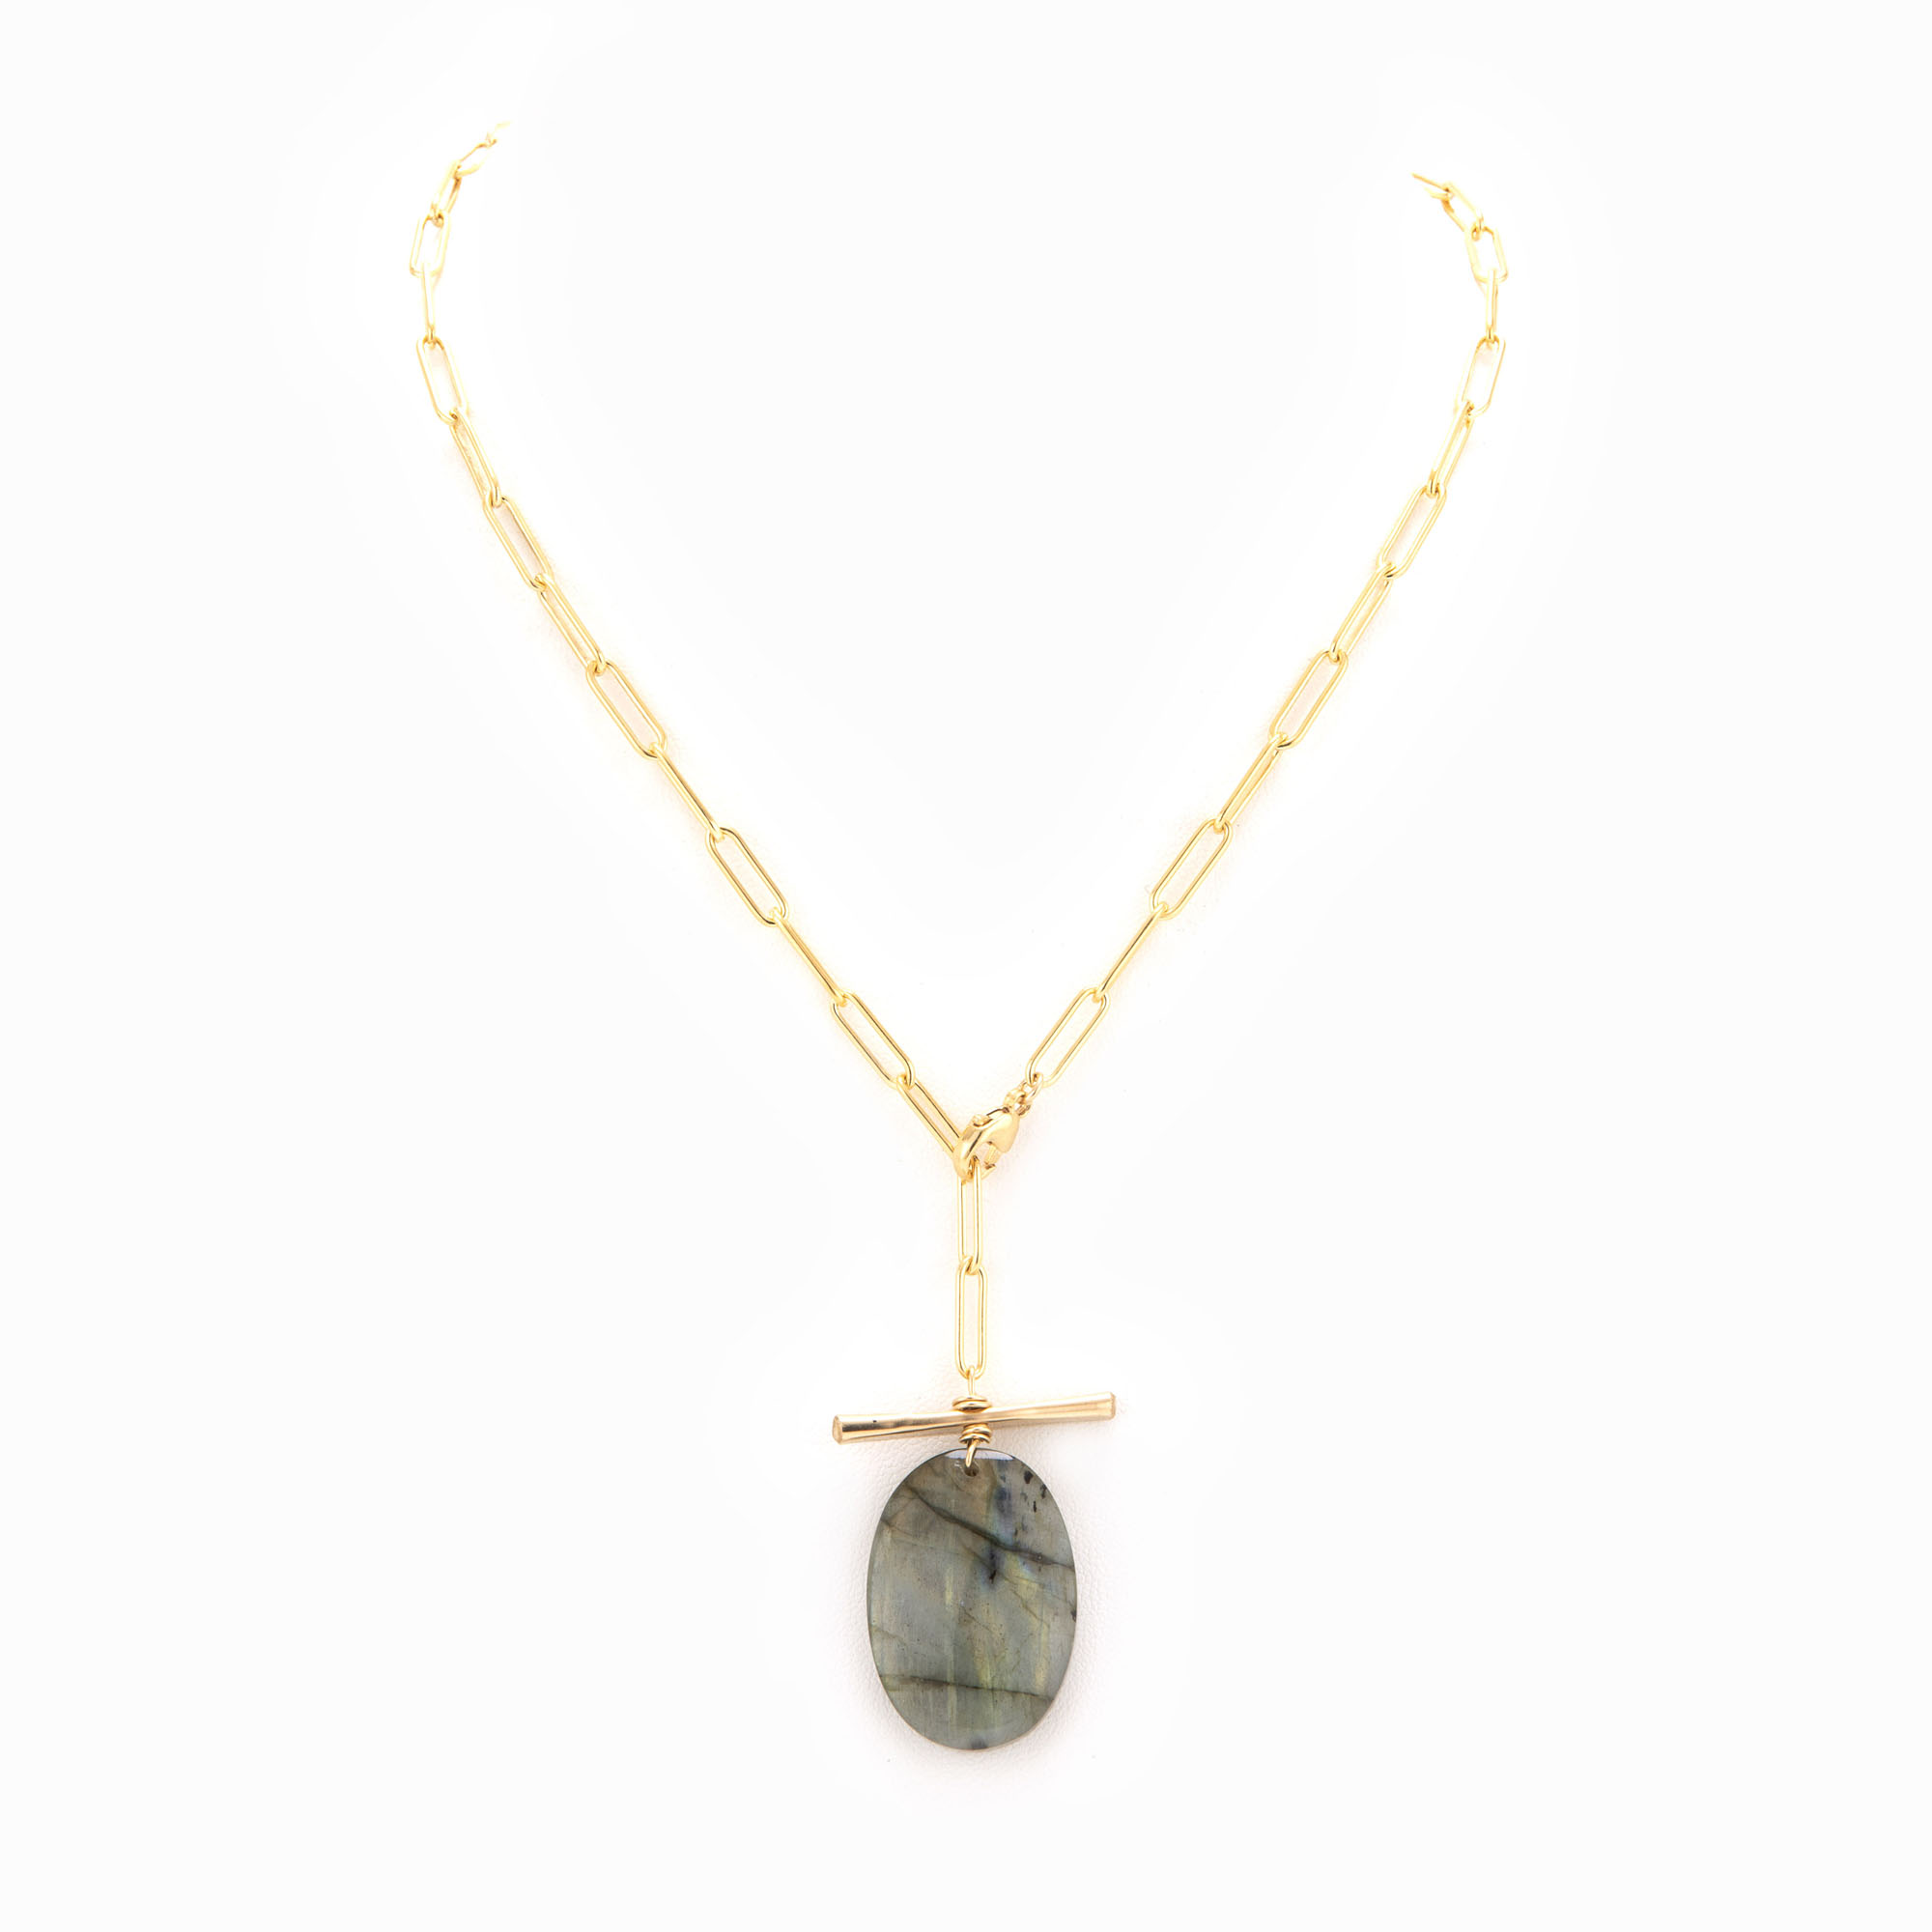 Featured image for “Labradorite Paper Clip Chain Necklace”